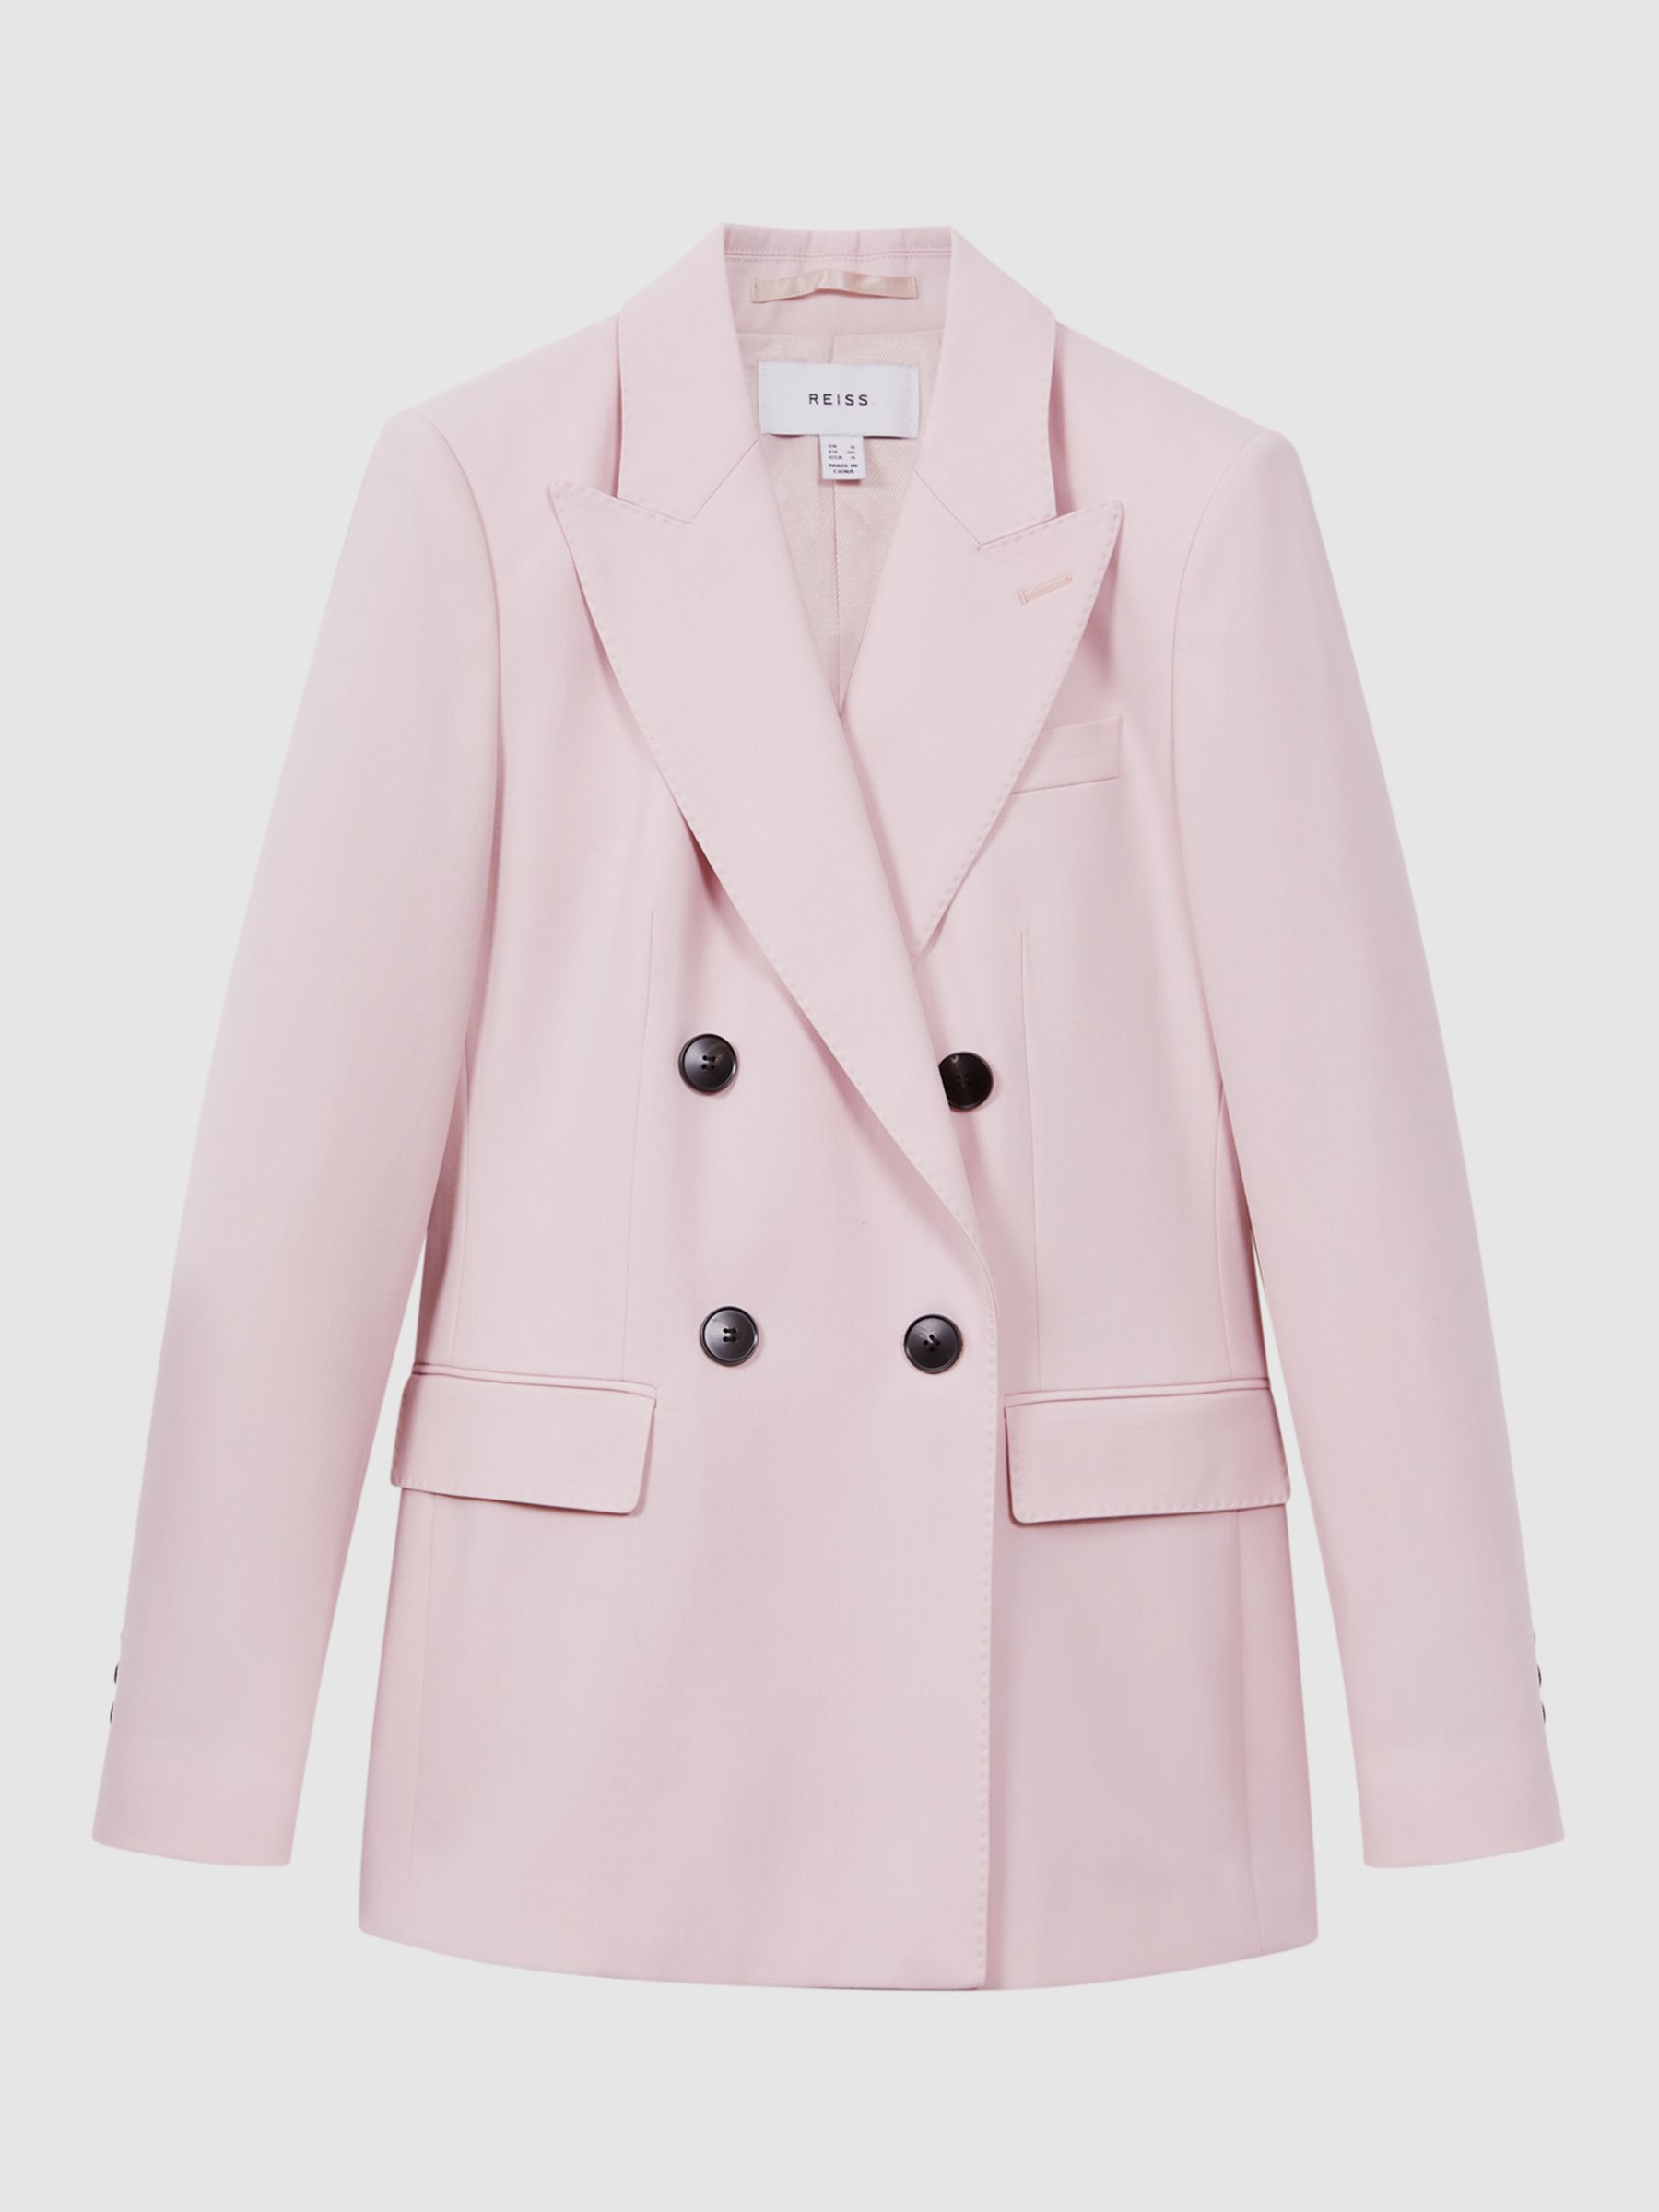 Reiss Evelyn Double Breasted Wool Blend Blazer, Pink at John Lewis ...